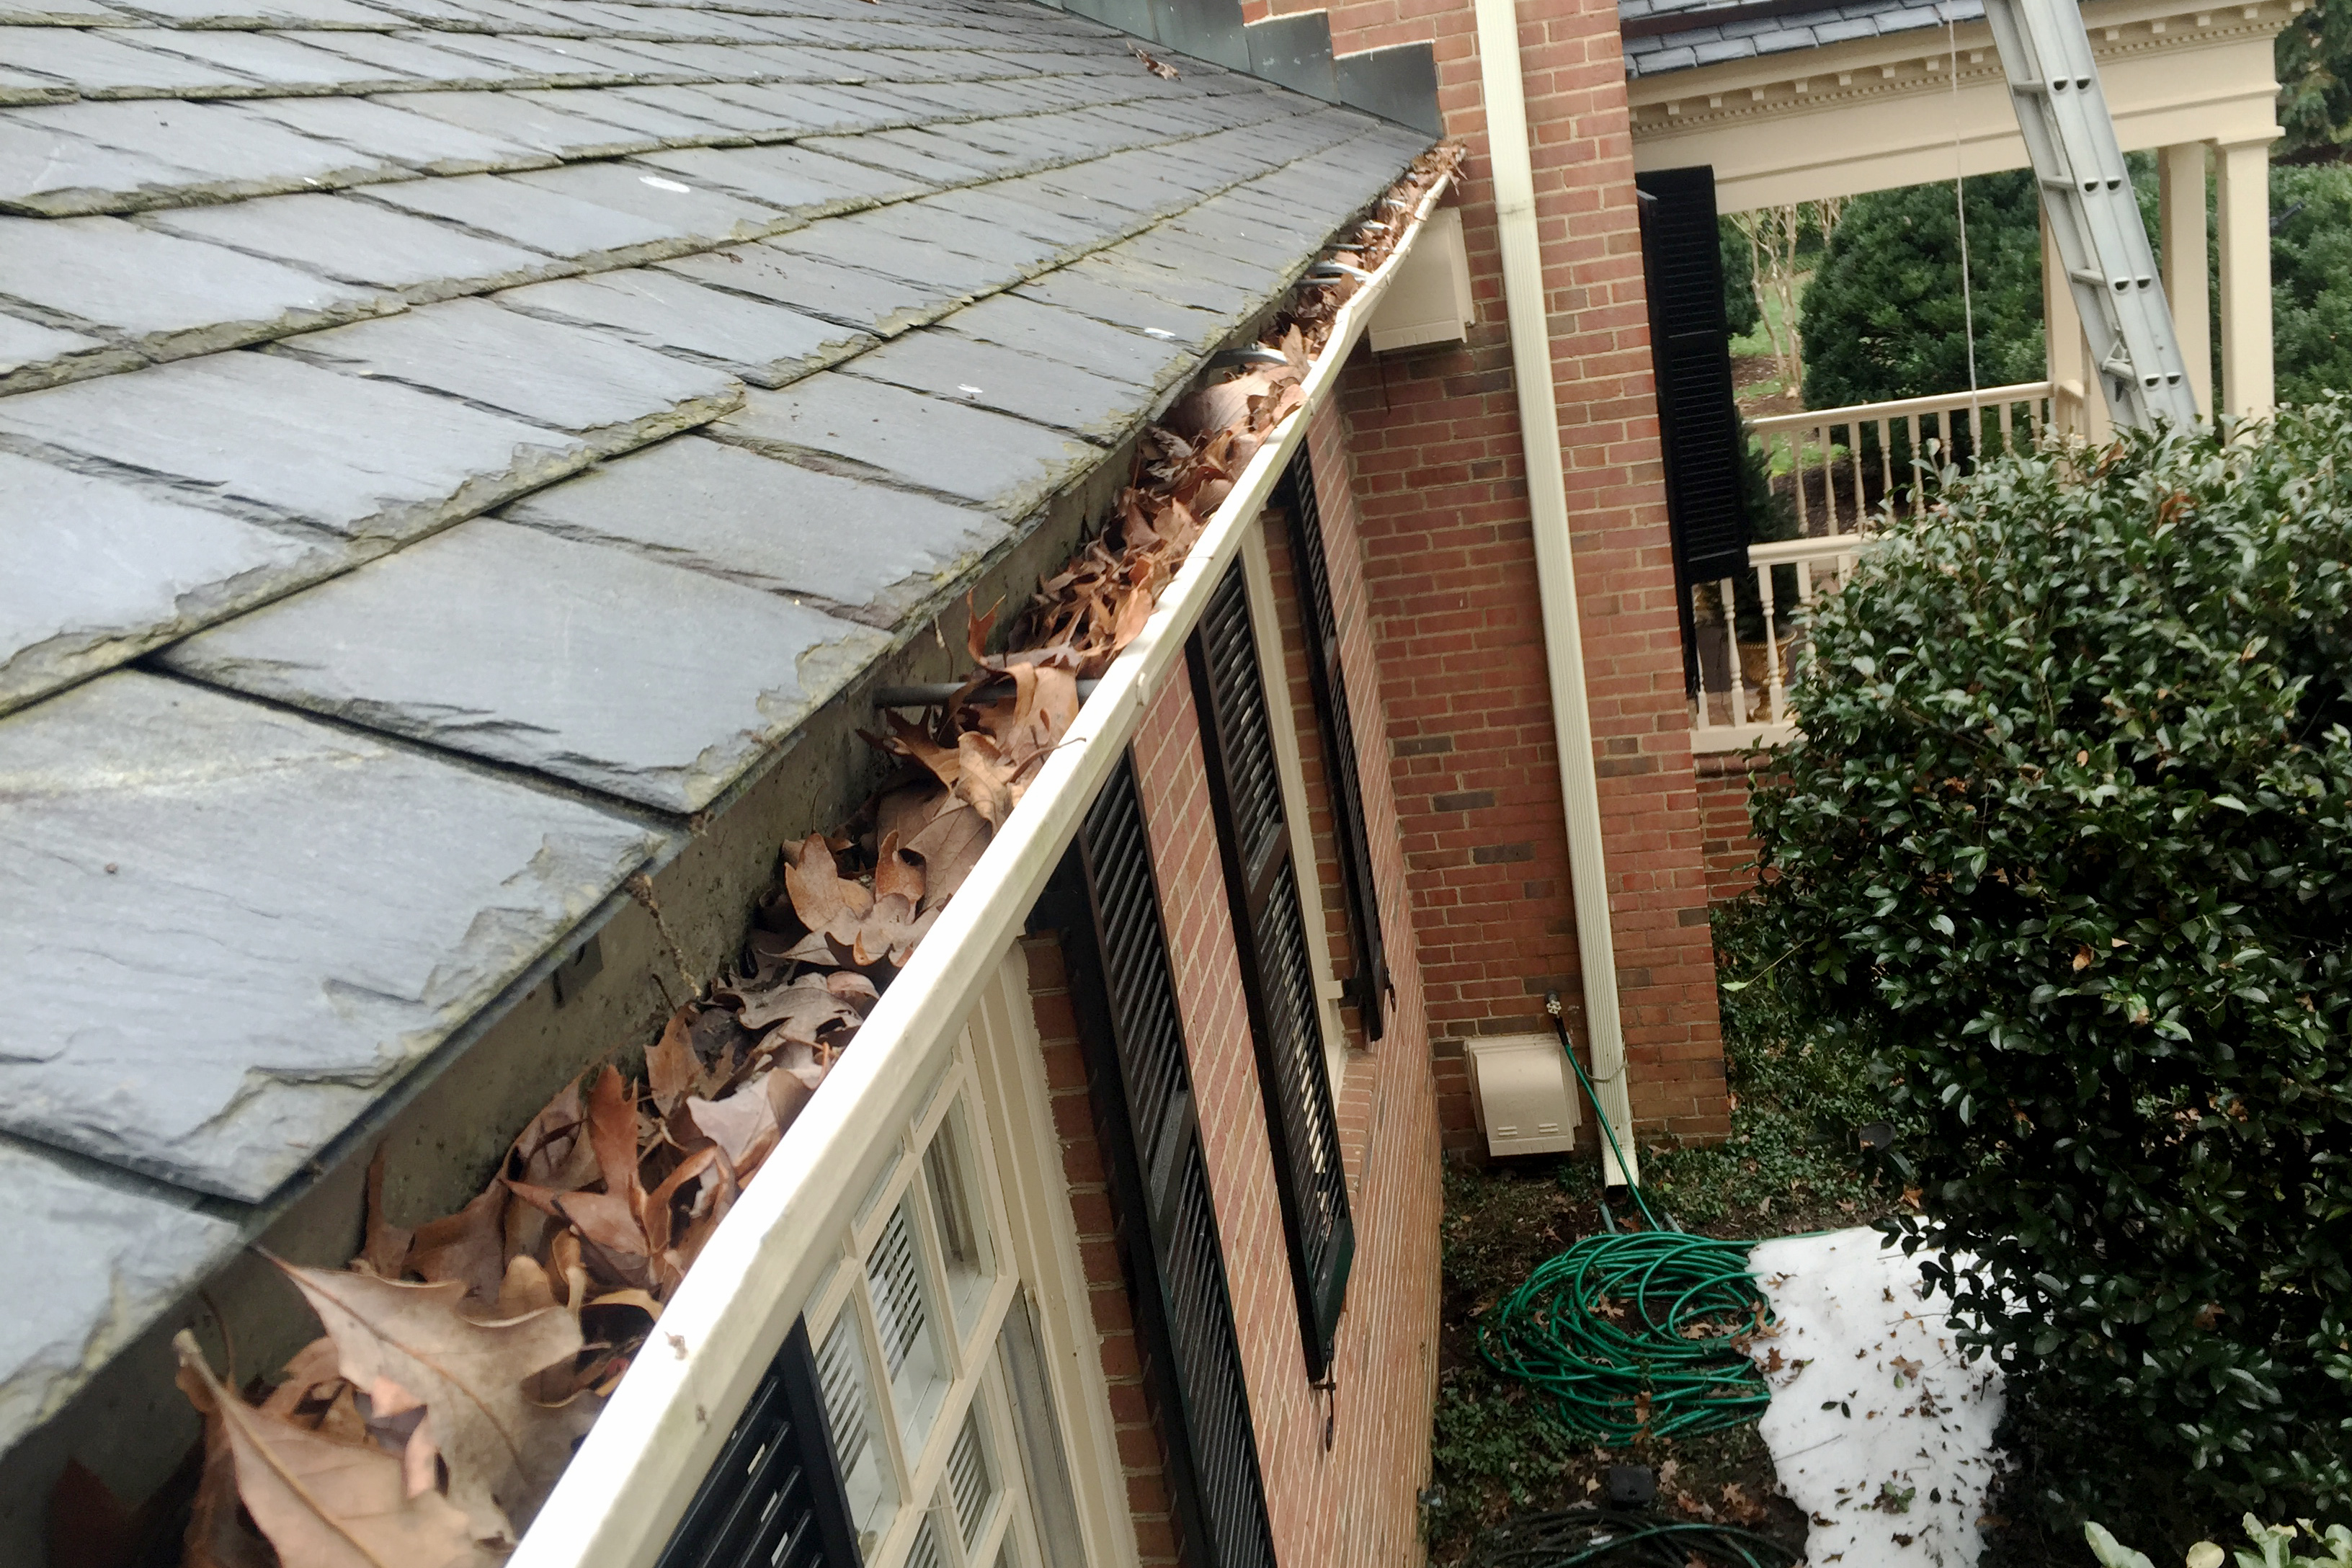 Leaf clogged gutters